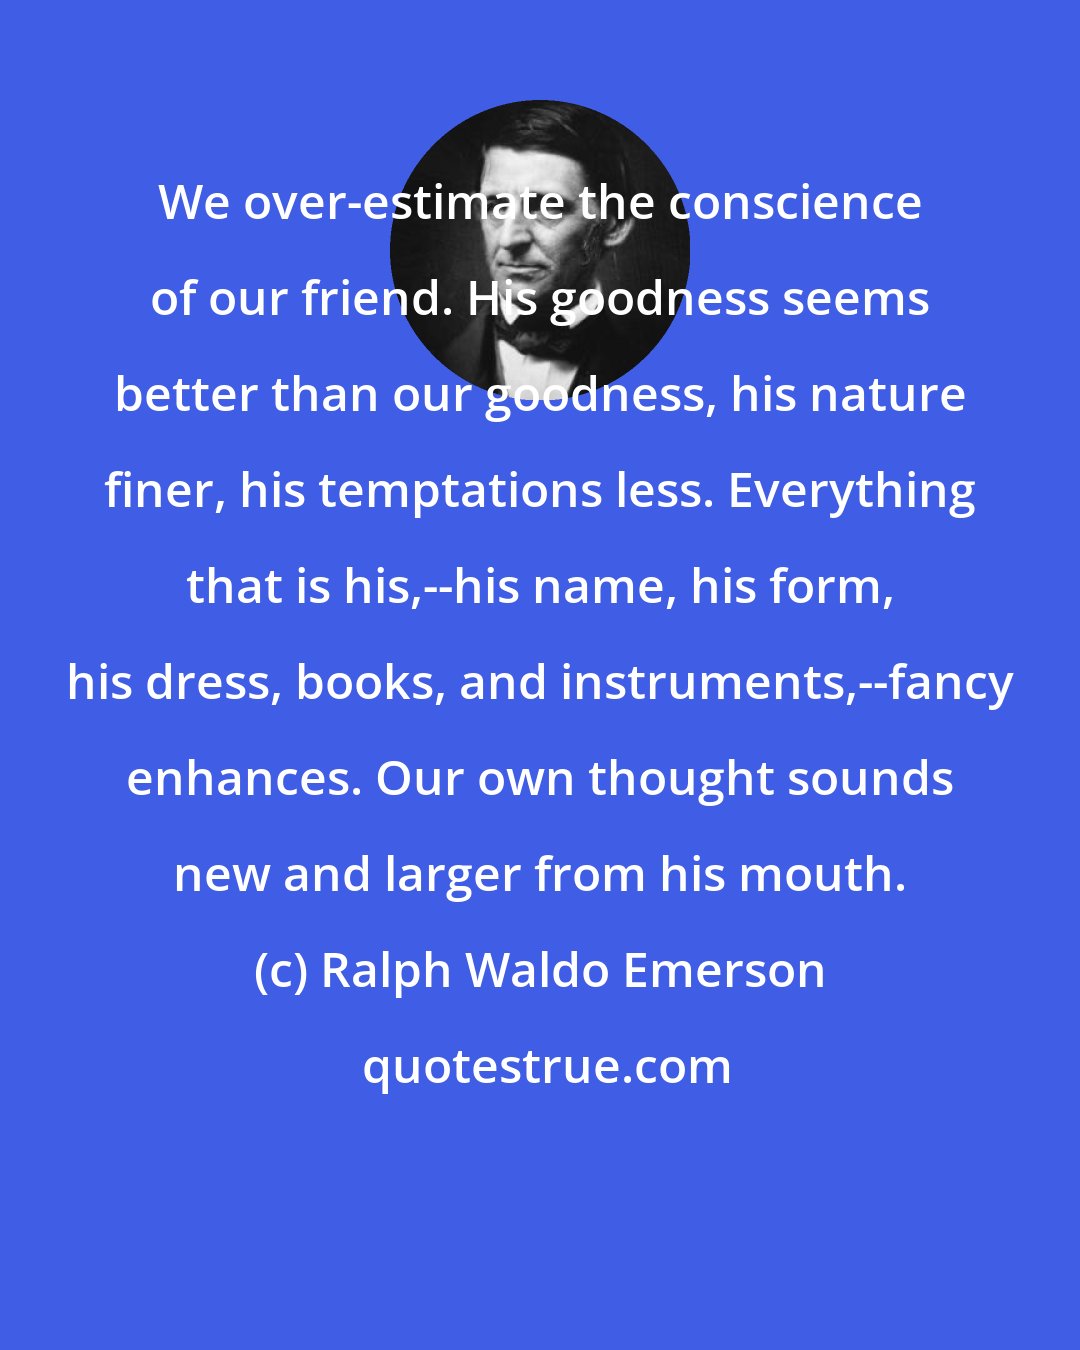 Ralph Waldo Emerson: We over-estimate the conscience of our friend. His goodness seems better than our goodness, his nature finer, his temptations less. Everything that is his,--his name, his form, his dress, books, and instruments,--fancy enhances. Our own thought sounds new and larger from his mouth.